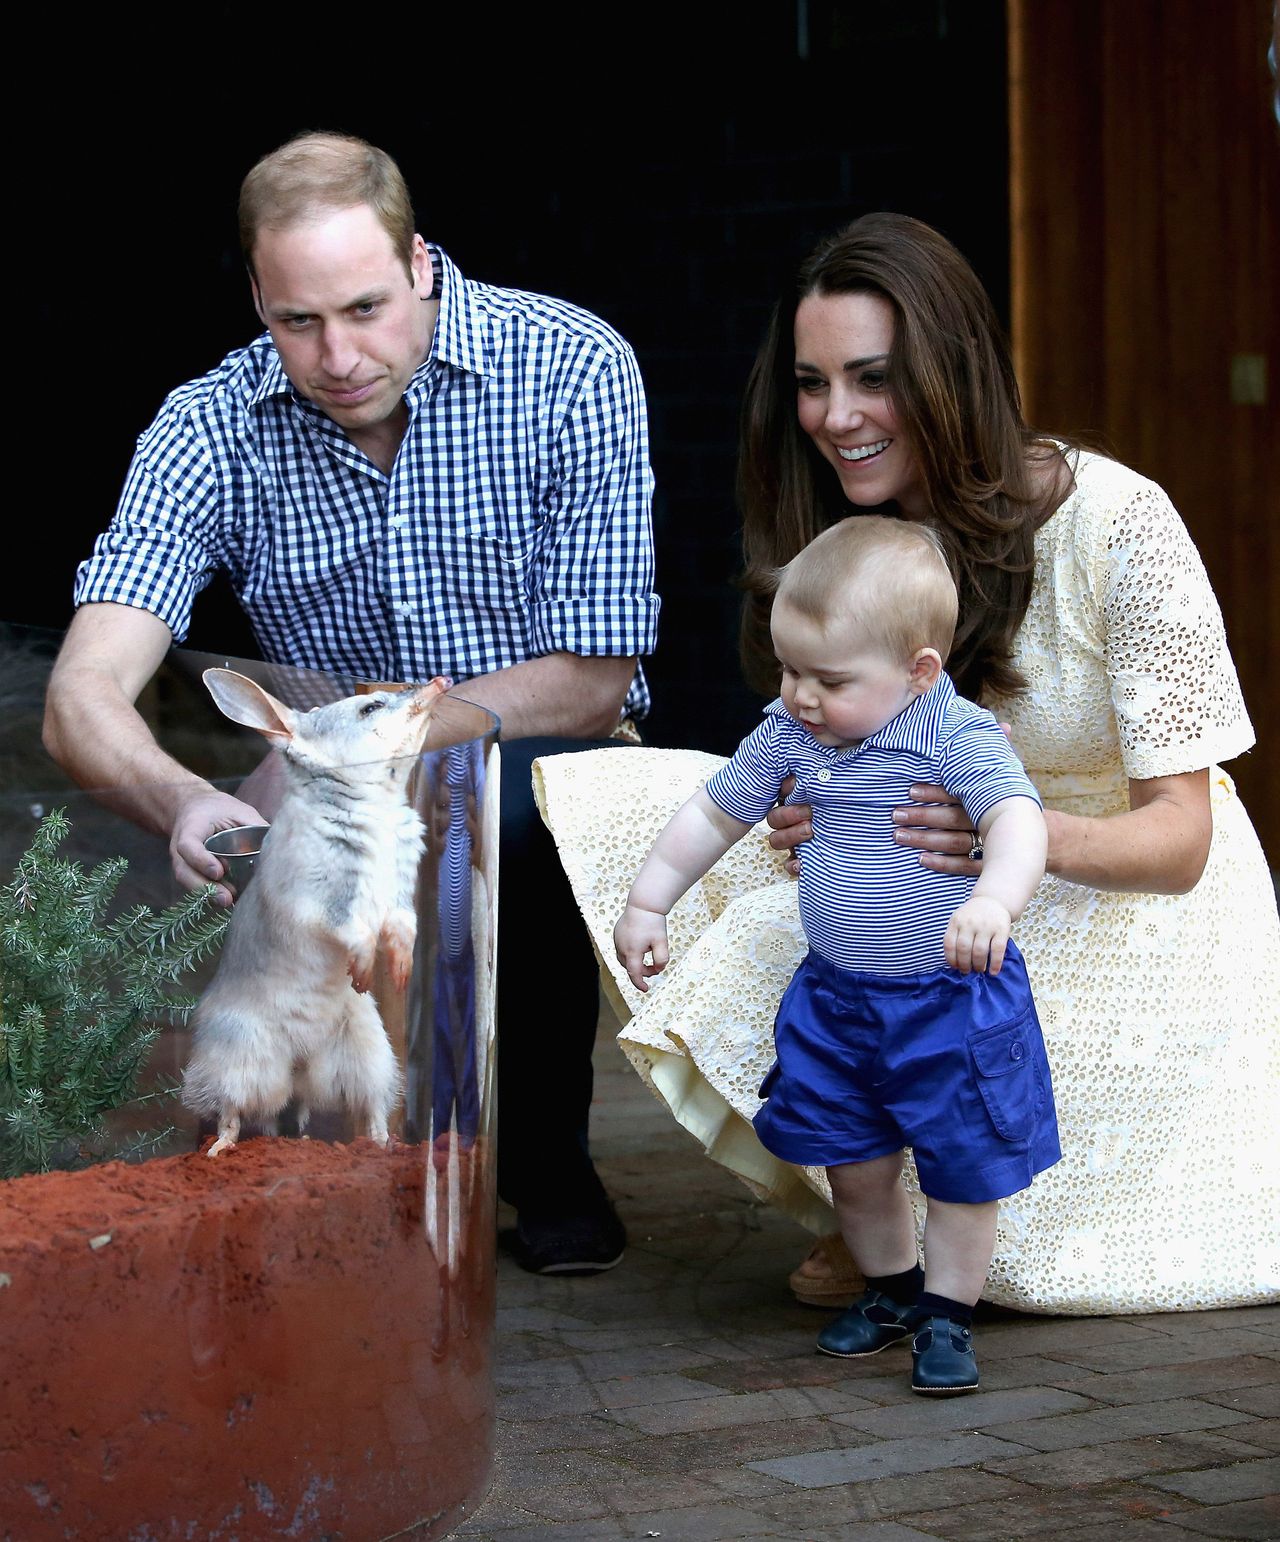 William and Catherine, Duke and Duchess of Cambridge, embarked upon a high-profile visit to Australia with Prince George in 2014.